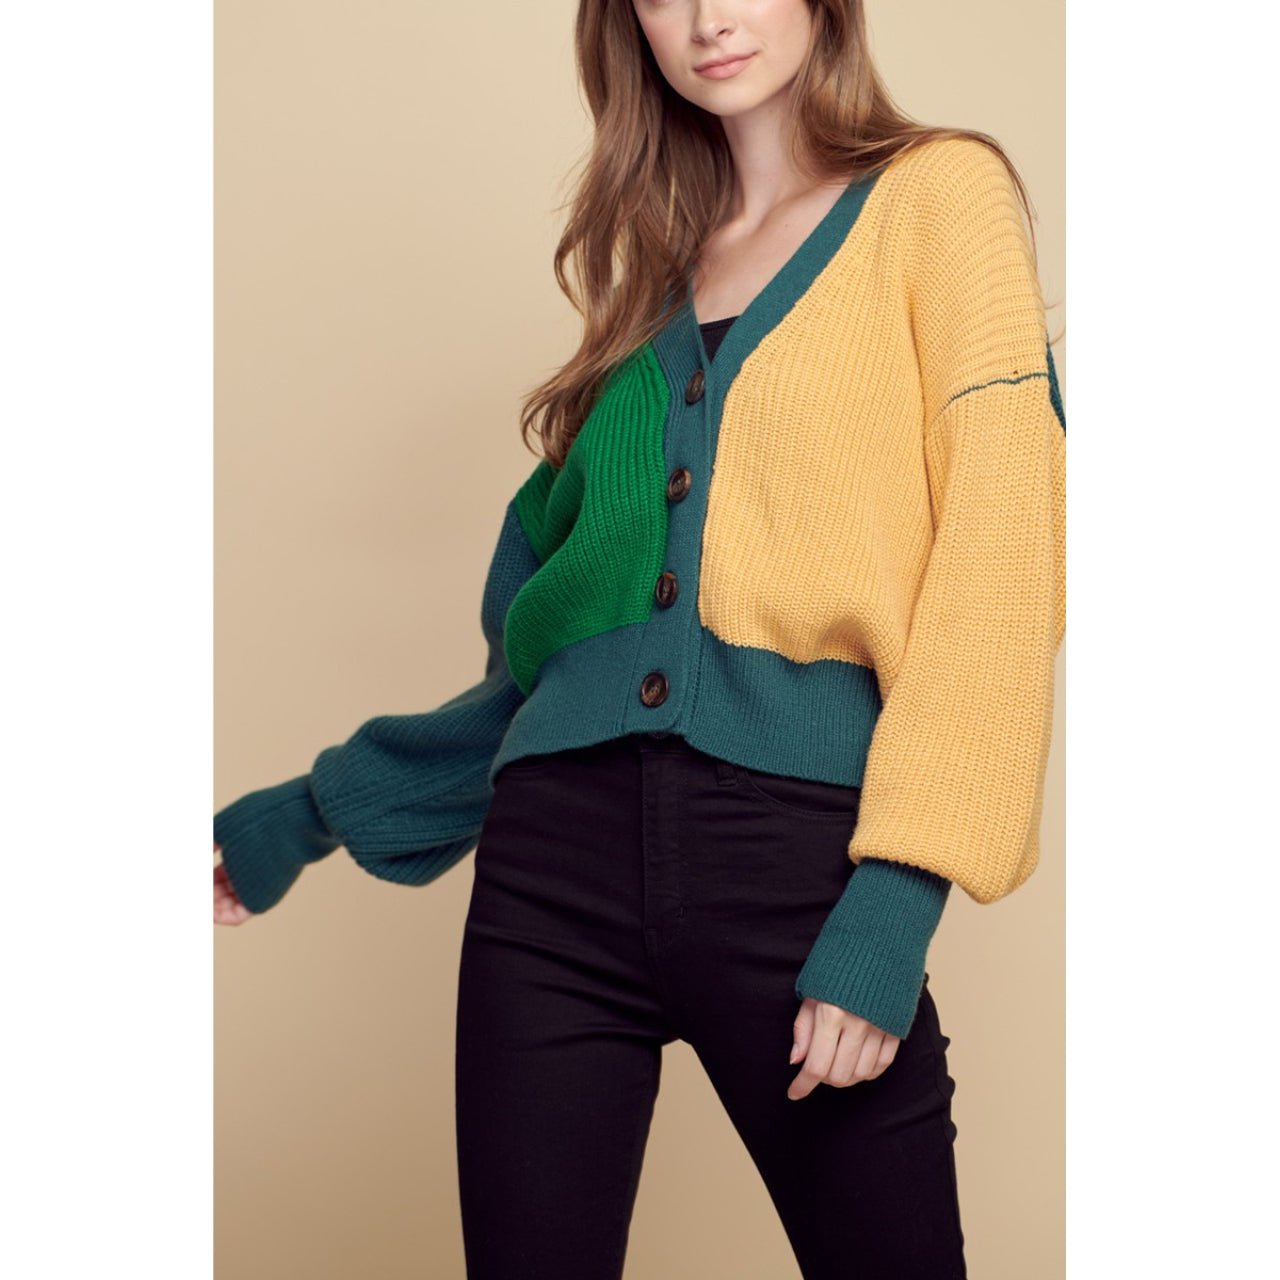 Callie Bold And Colorful Cardigan With V Neck and Drop Shoulder - The Graphic Tee